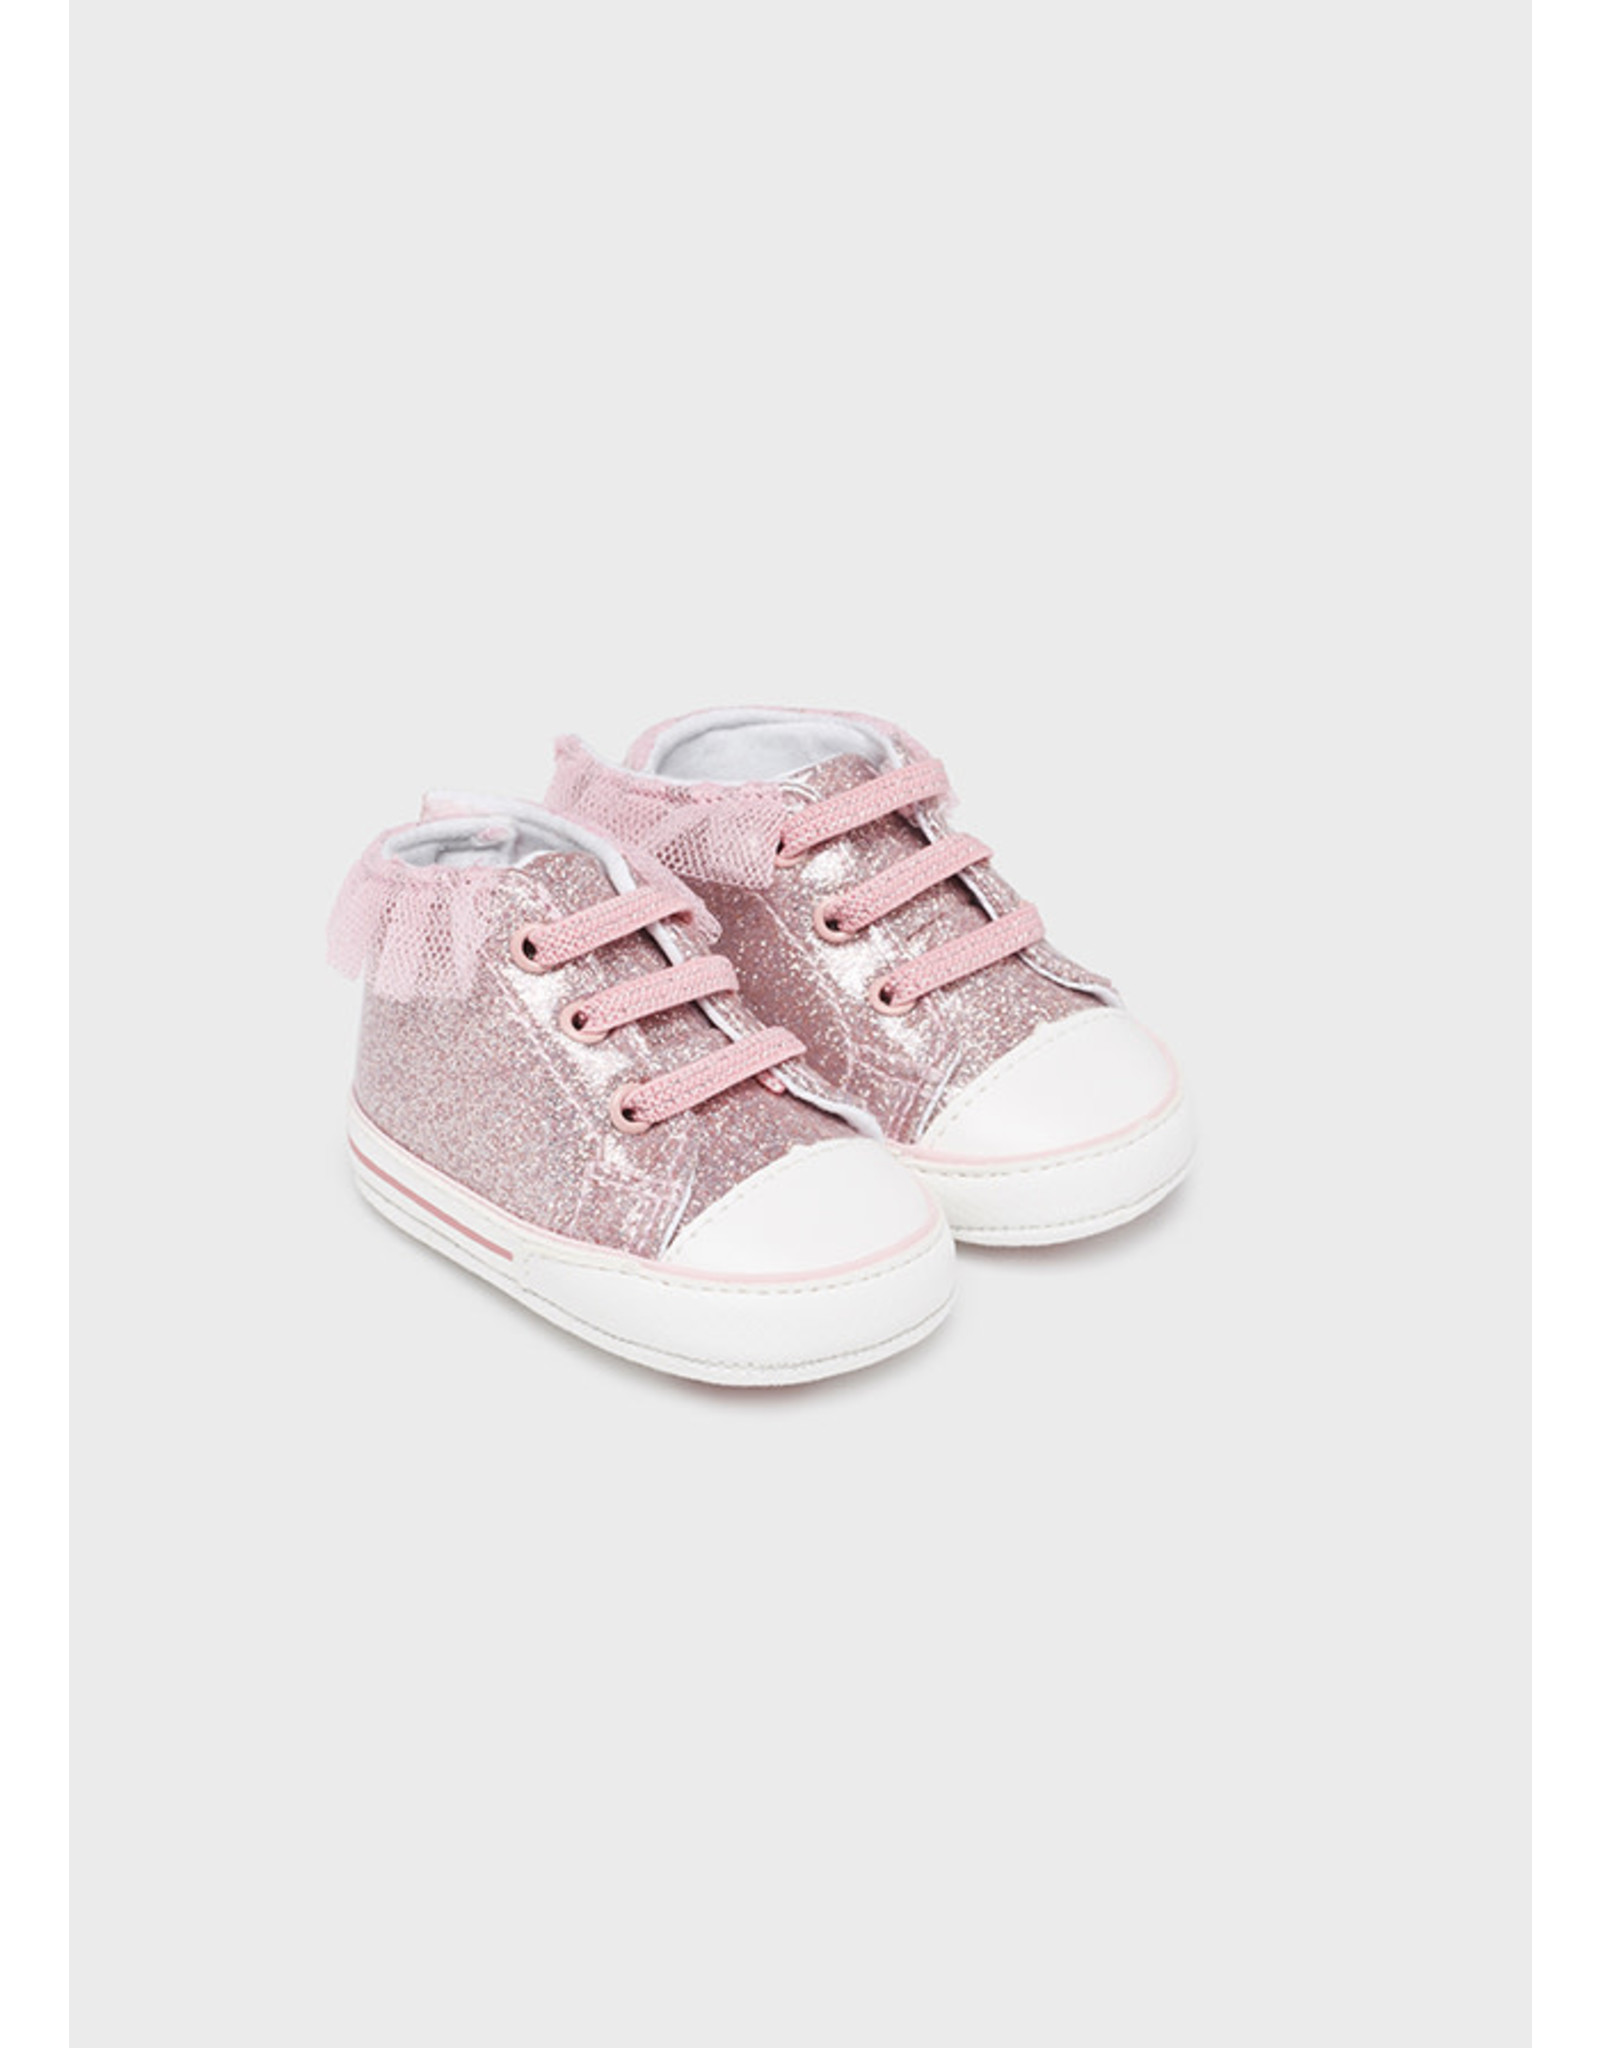 Mayoral Blush Shimmer Sneakers